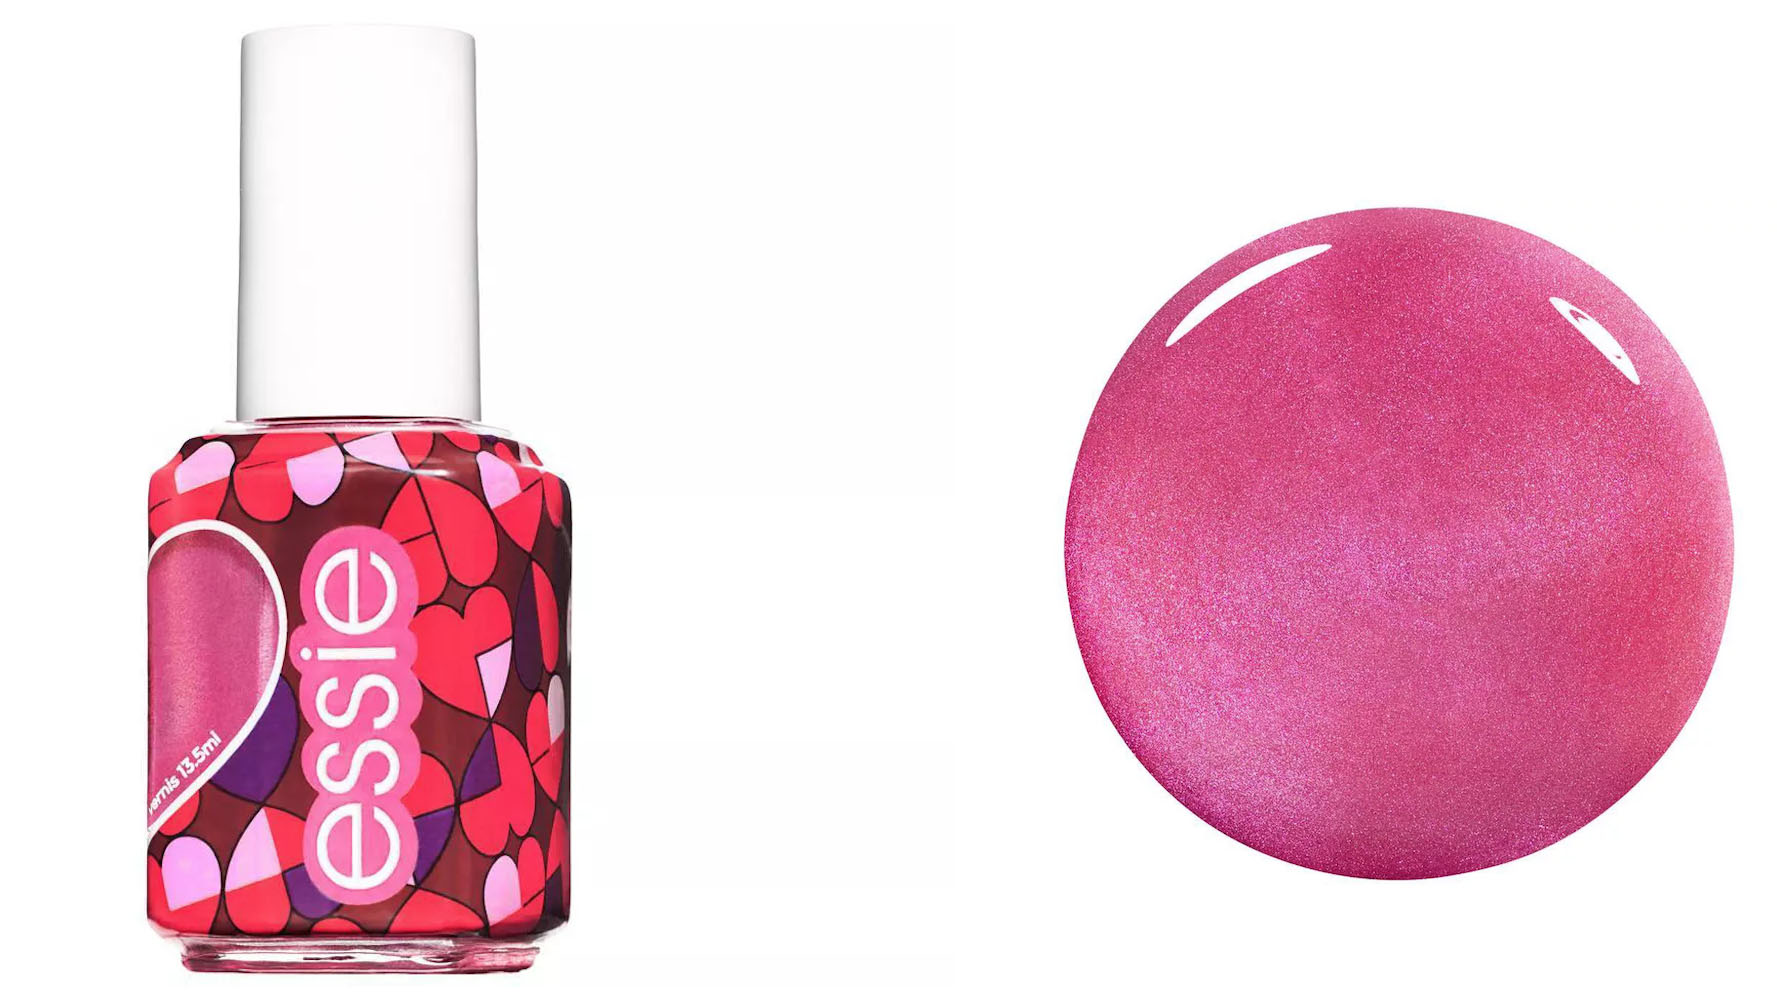 Essie's $9 Valentine's Day Nail Polish Has Captured Our Hearts